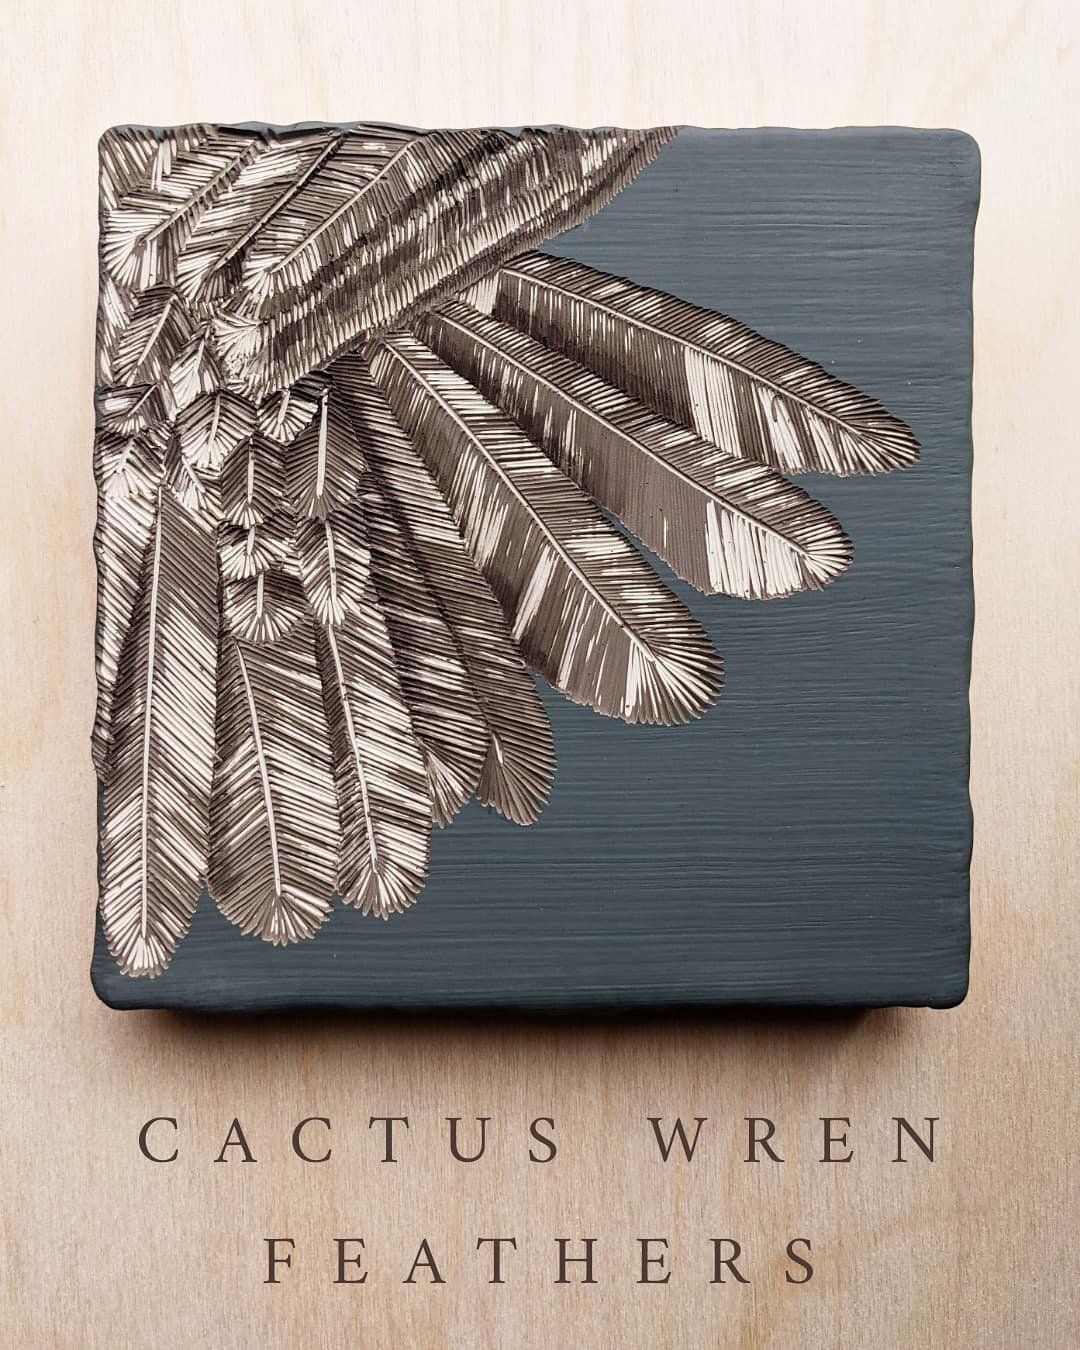 Last board is complete! Cactus Wren Feathers 6x6 will be framed next week.

So happy to have completed all 5 boards. I am surprised at what I was able to create too.

#cactuswren #feathers #feathersart #birdart #carvedpaint #carvedart #paintcarver #a